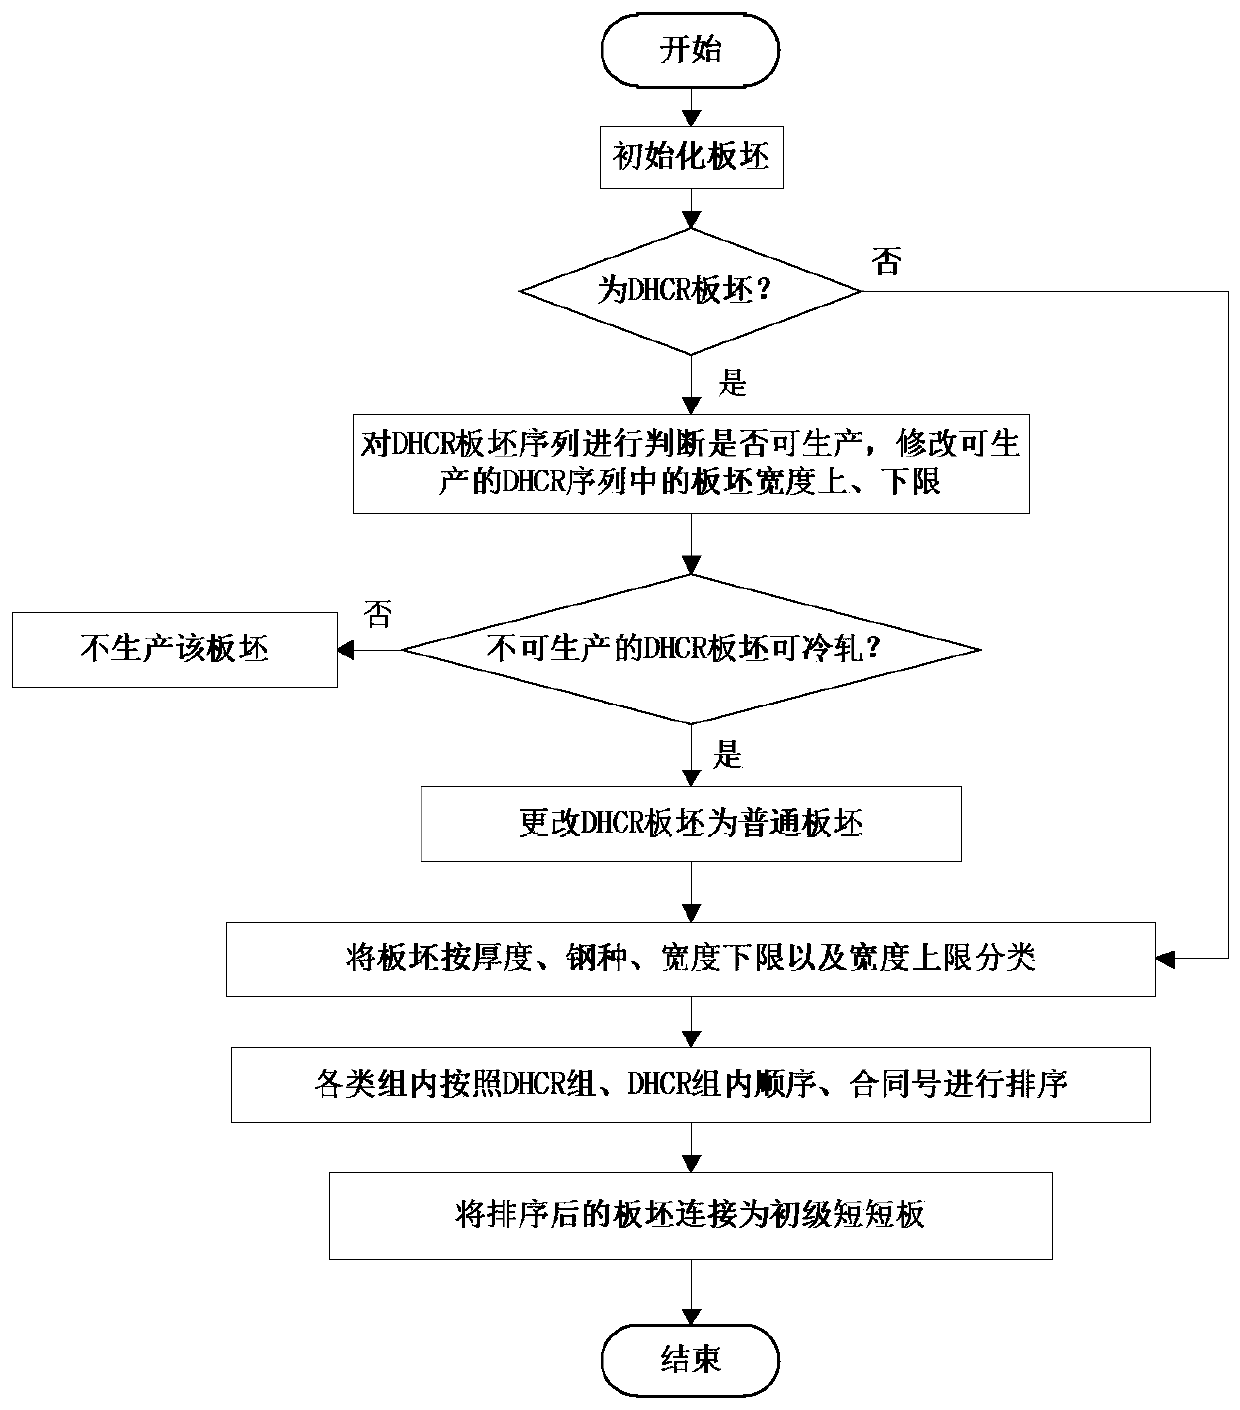 A process optimization control method for steelmaking and continuous casting industry